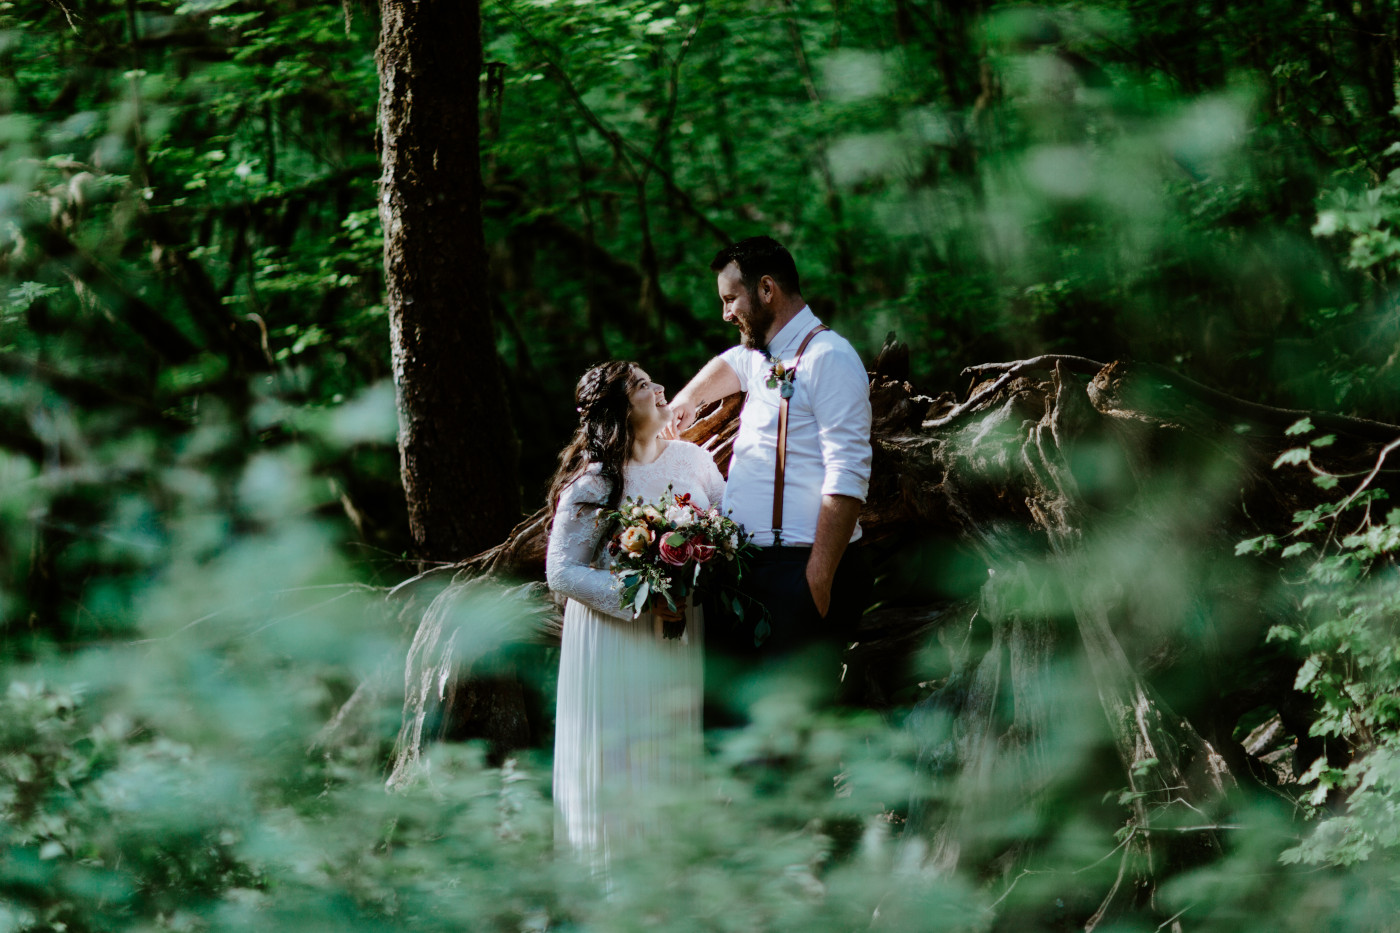 Brooke and Jack standing near a log. Elopement photography at Olympic National Park by Sienna Plus Josh.